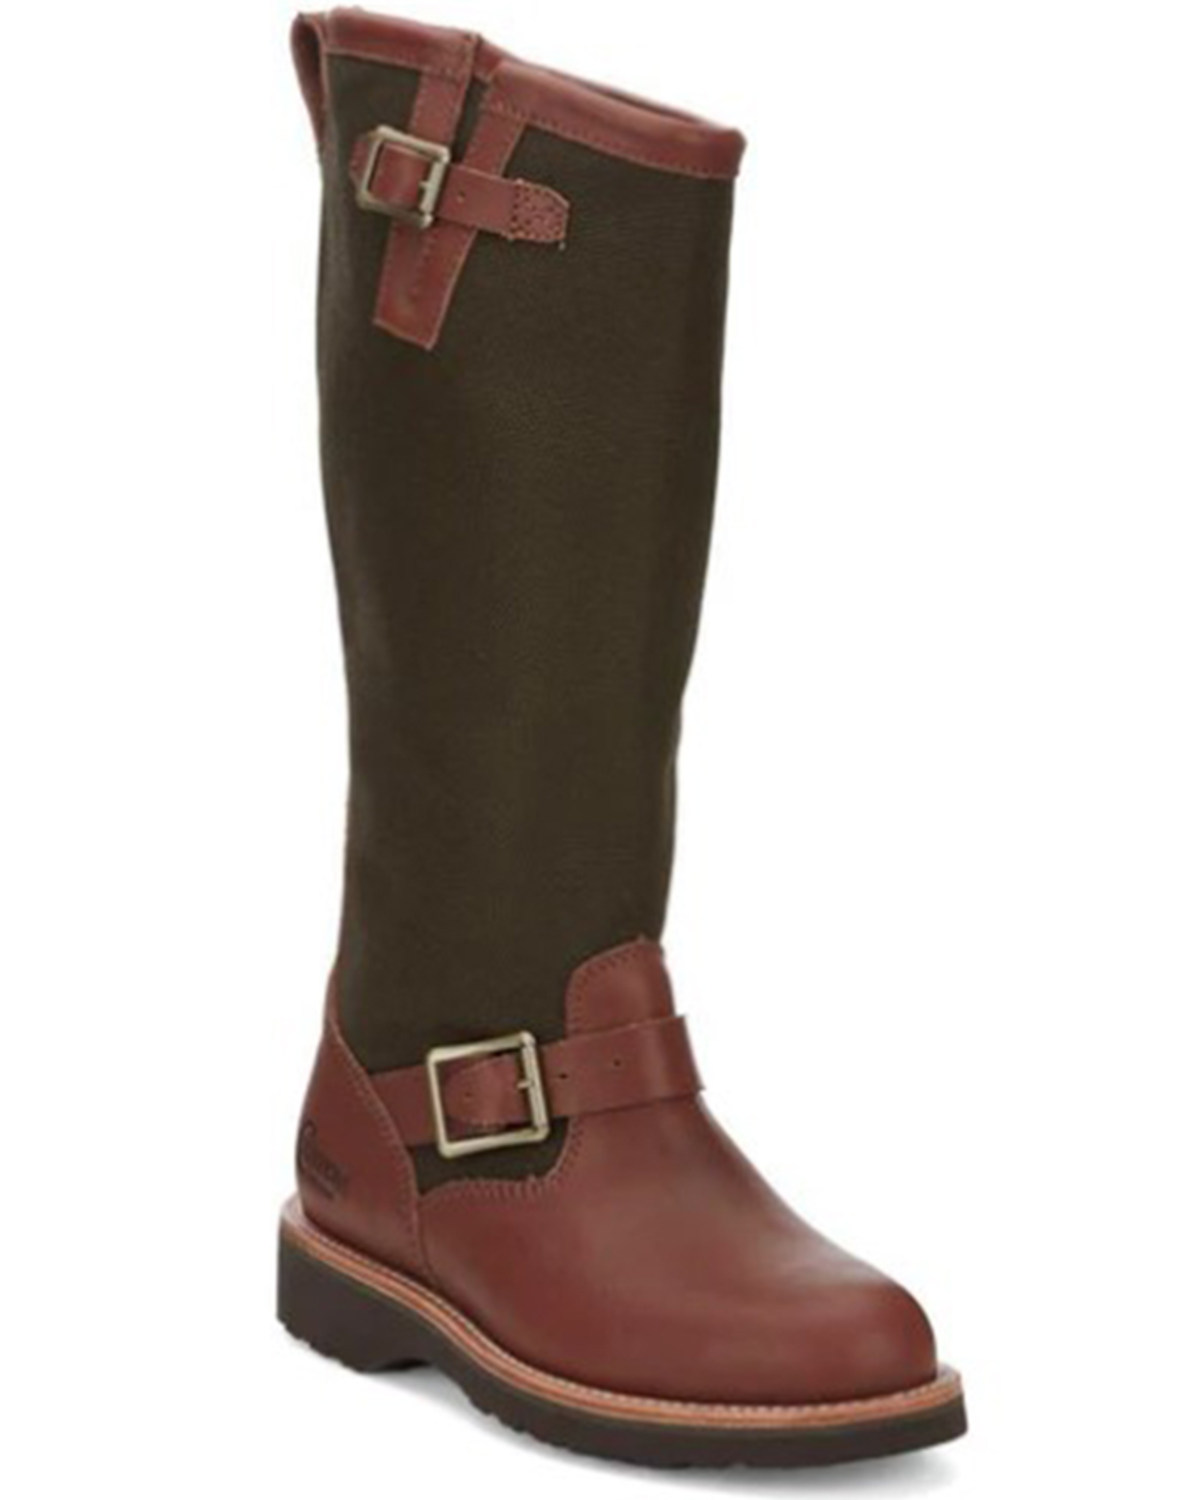 Chippewa Women's Snake Proof Pull On Leather Buckle Boot - Round Toe